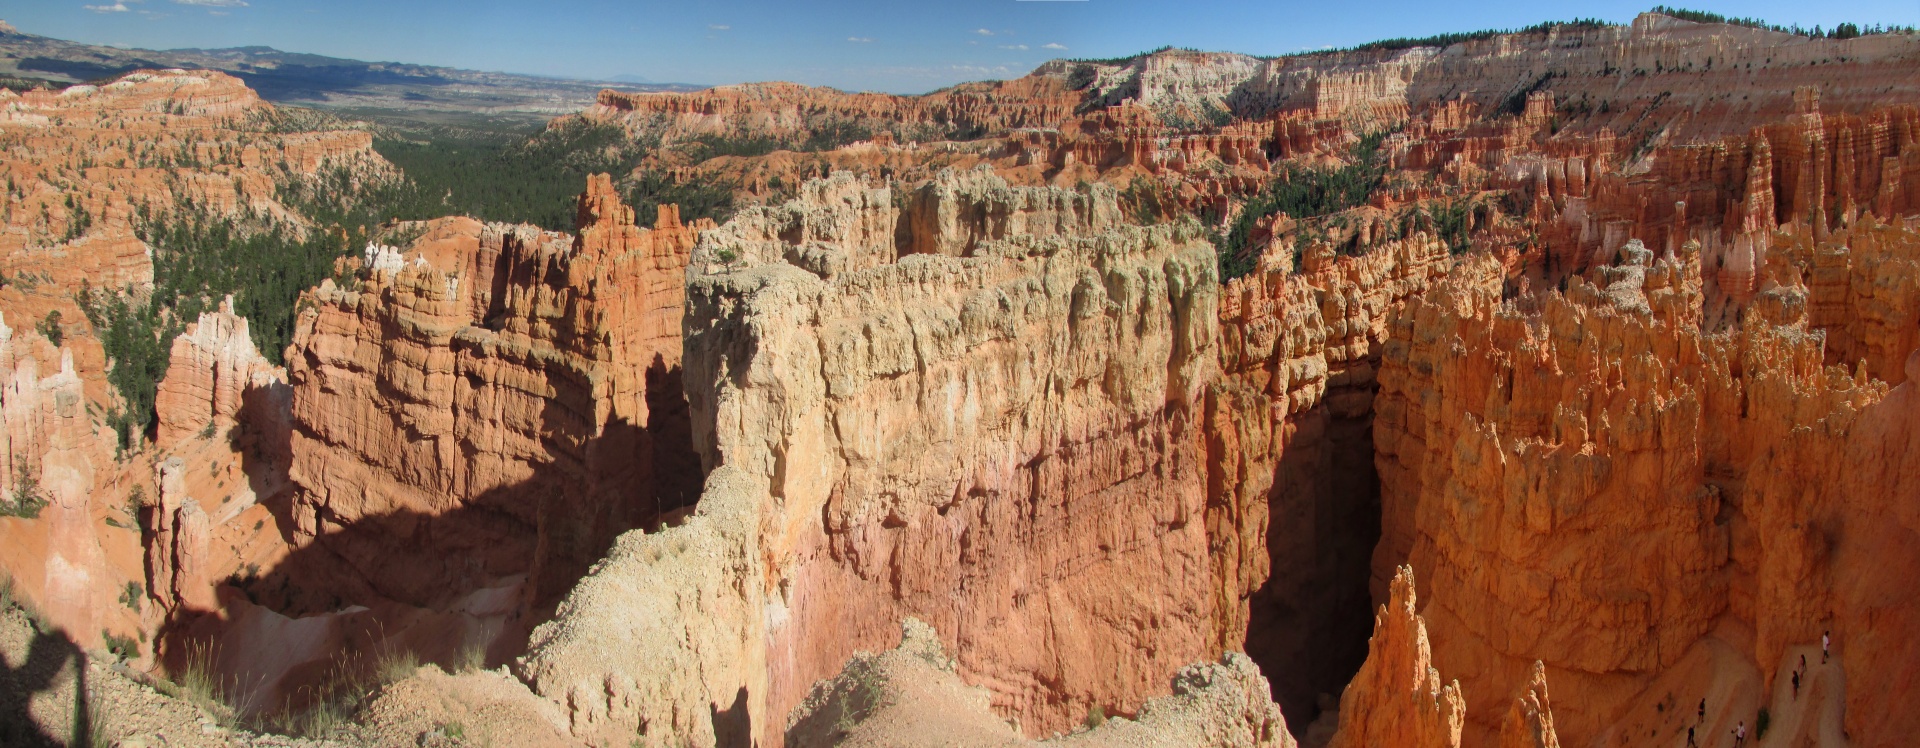 bryce canyon widescreen national park free photo